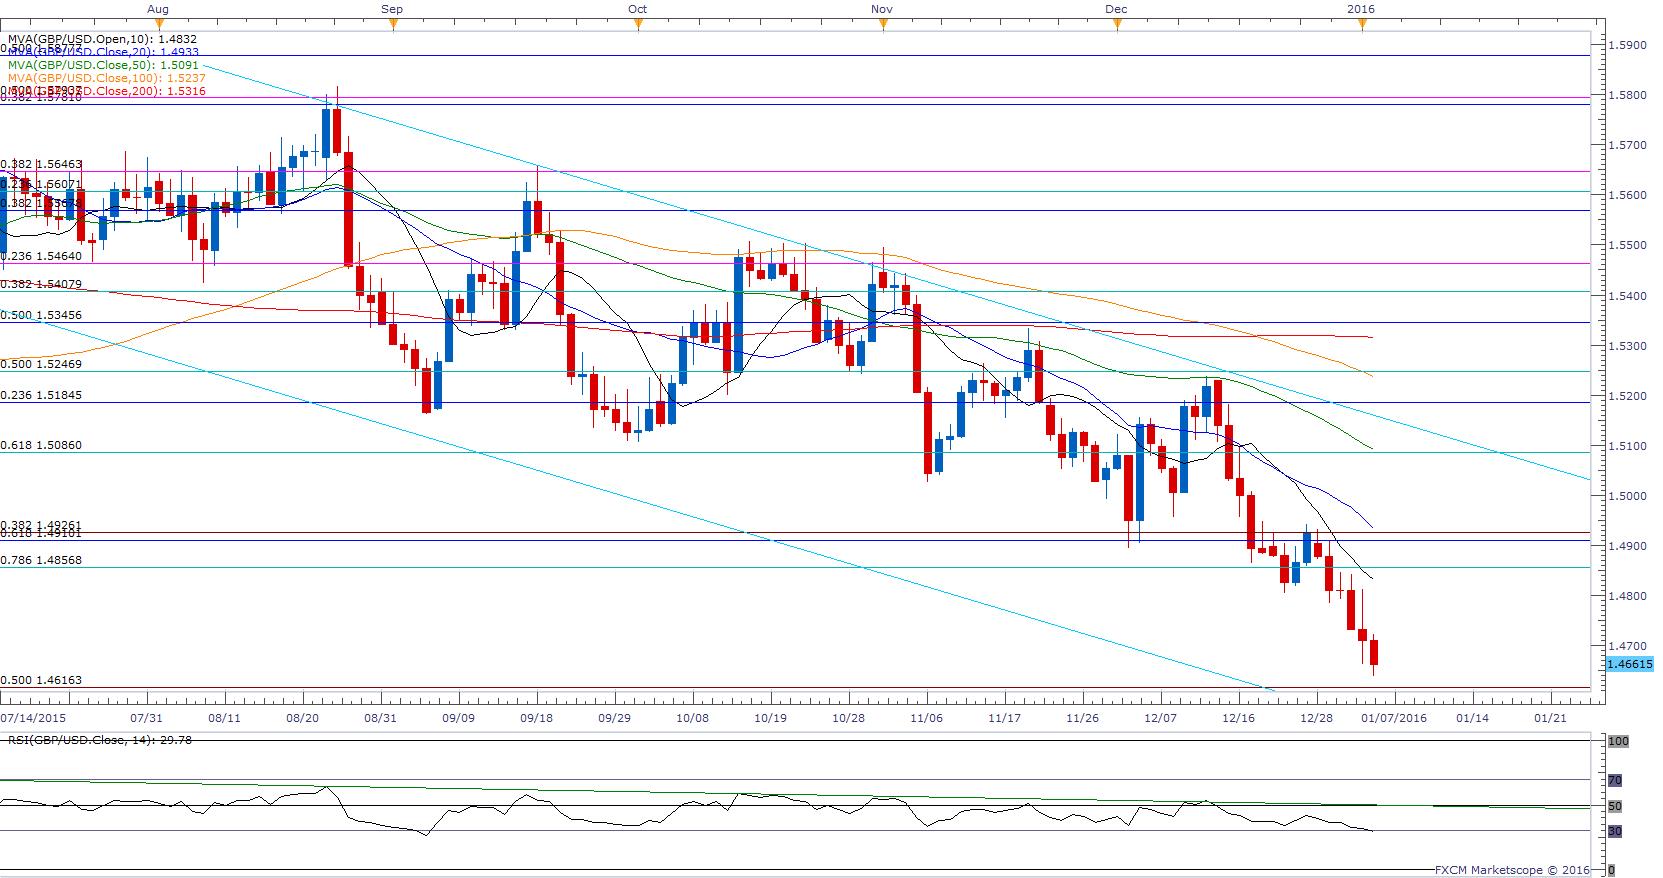 Usd To Gbp Daily Chart